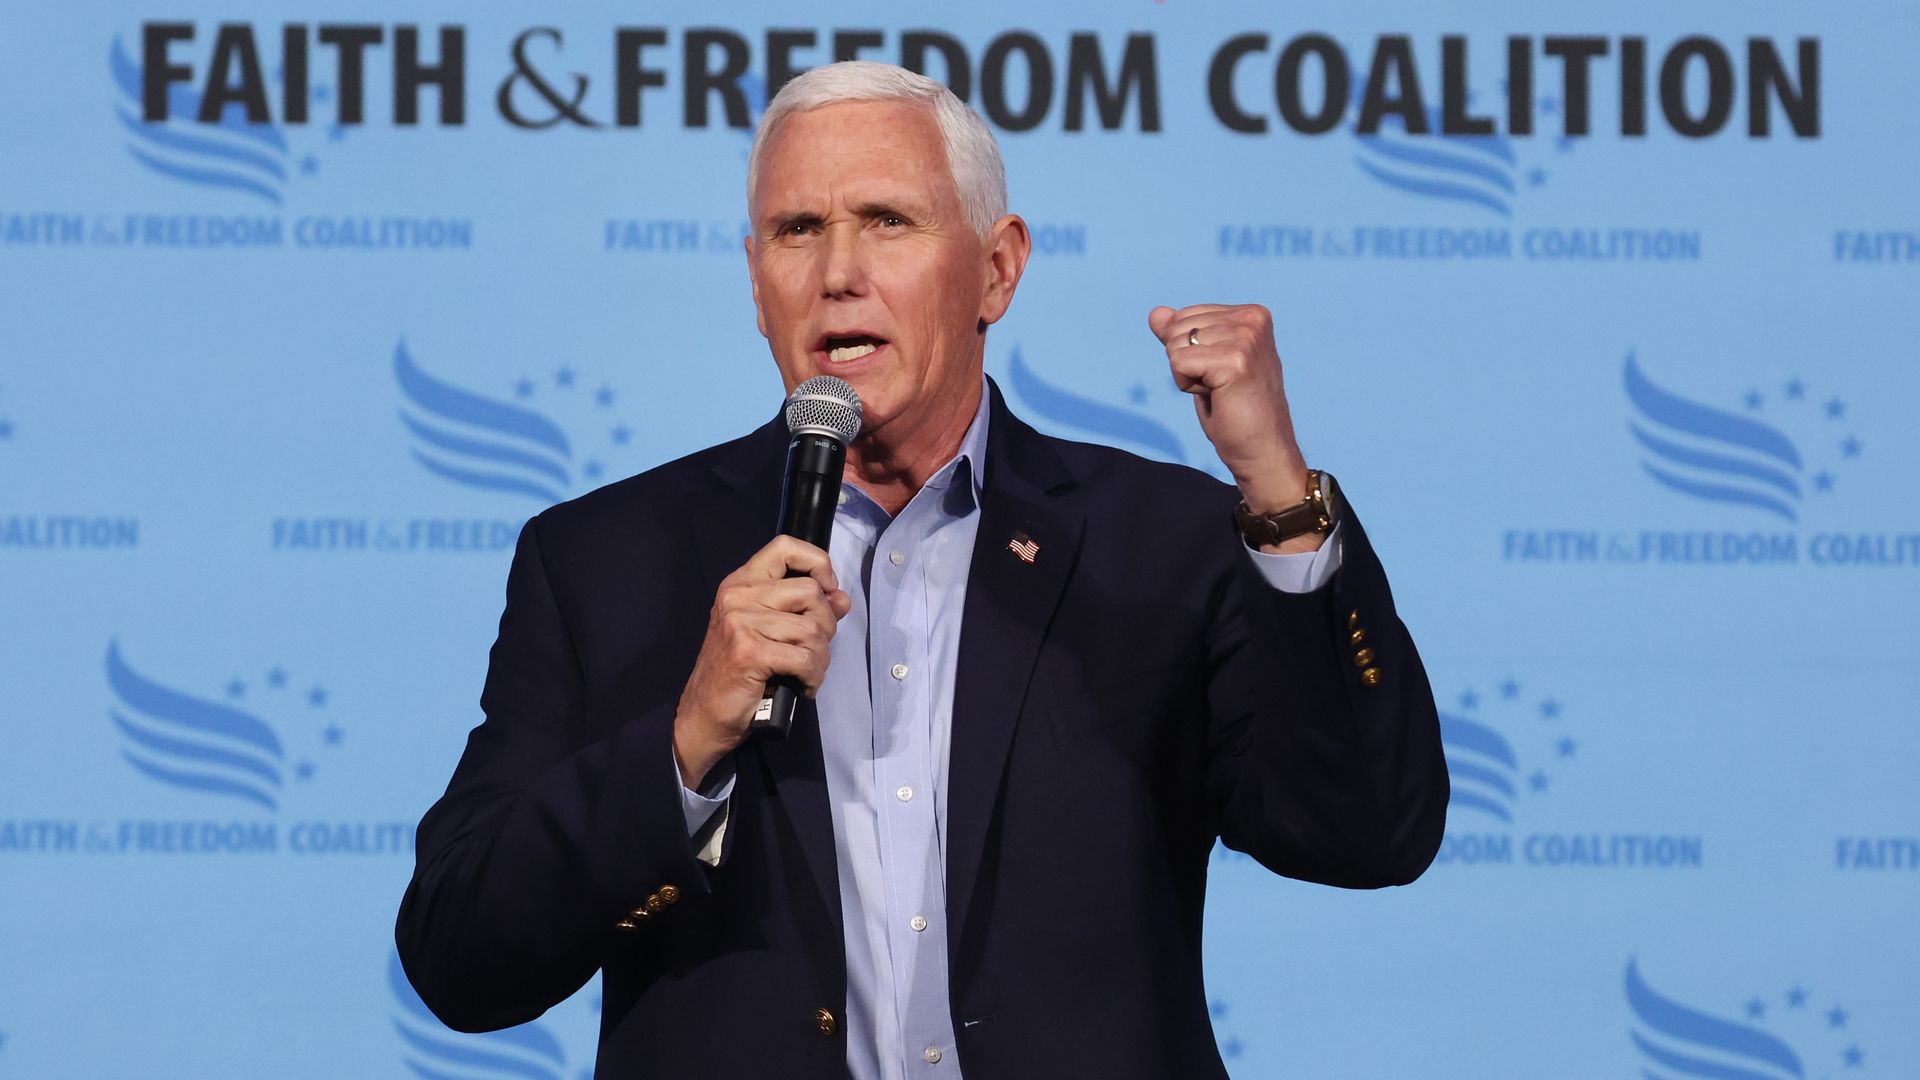 Mike Pence stands in front of a blue banner reading 'Faith and Freedom Coalition' while holding a microphone as he speaks to a crowd.